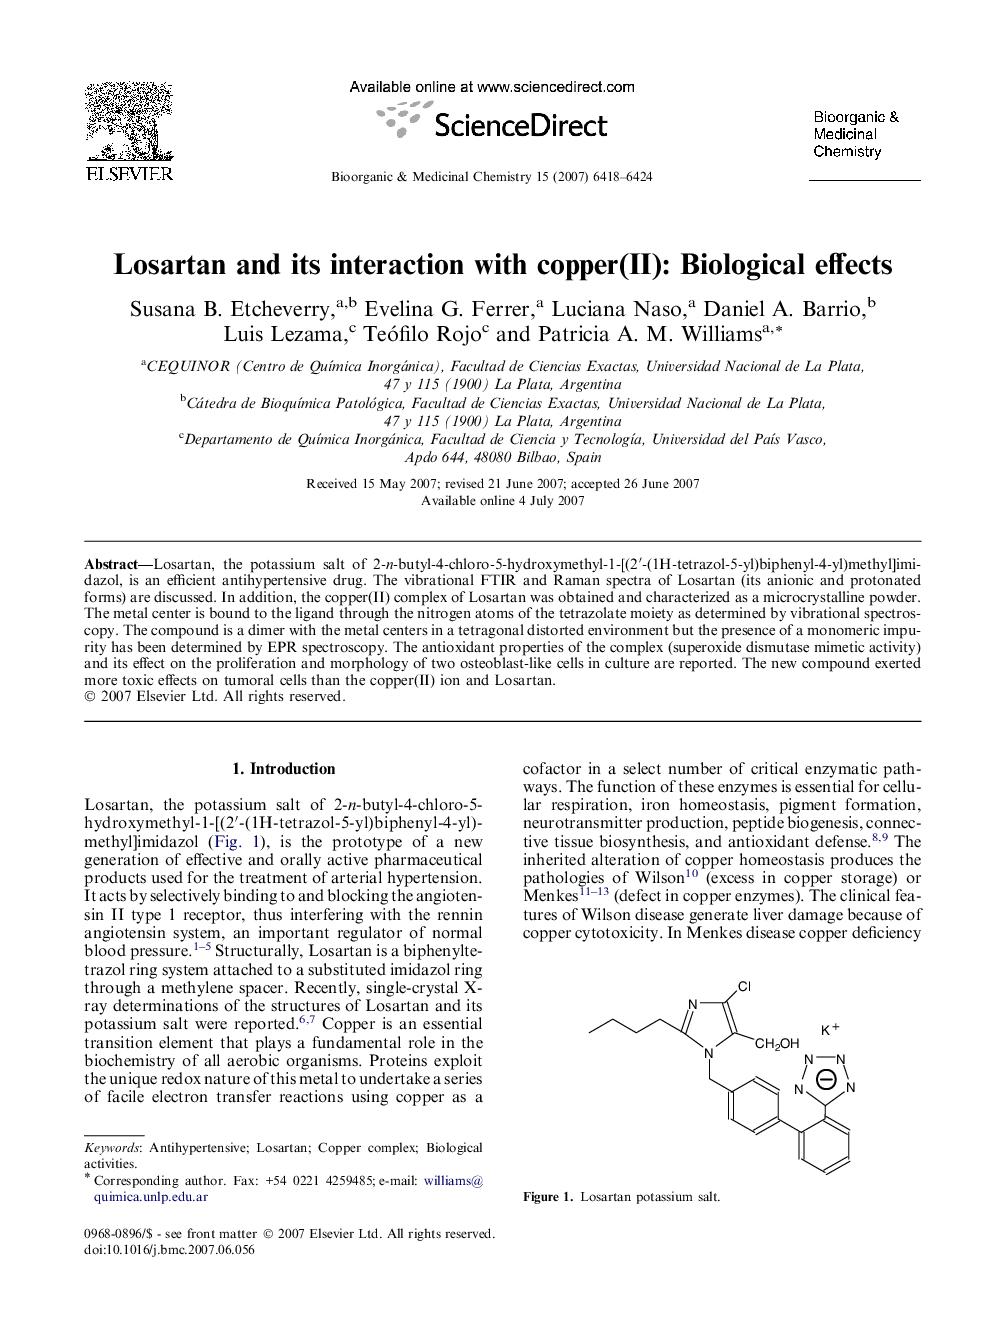 Losartan and its interaction with copper(II): Biological effects